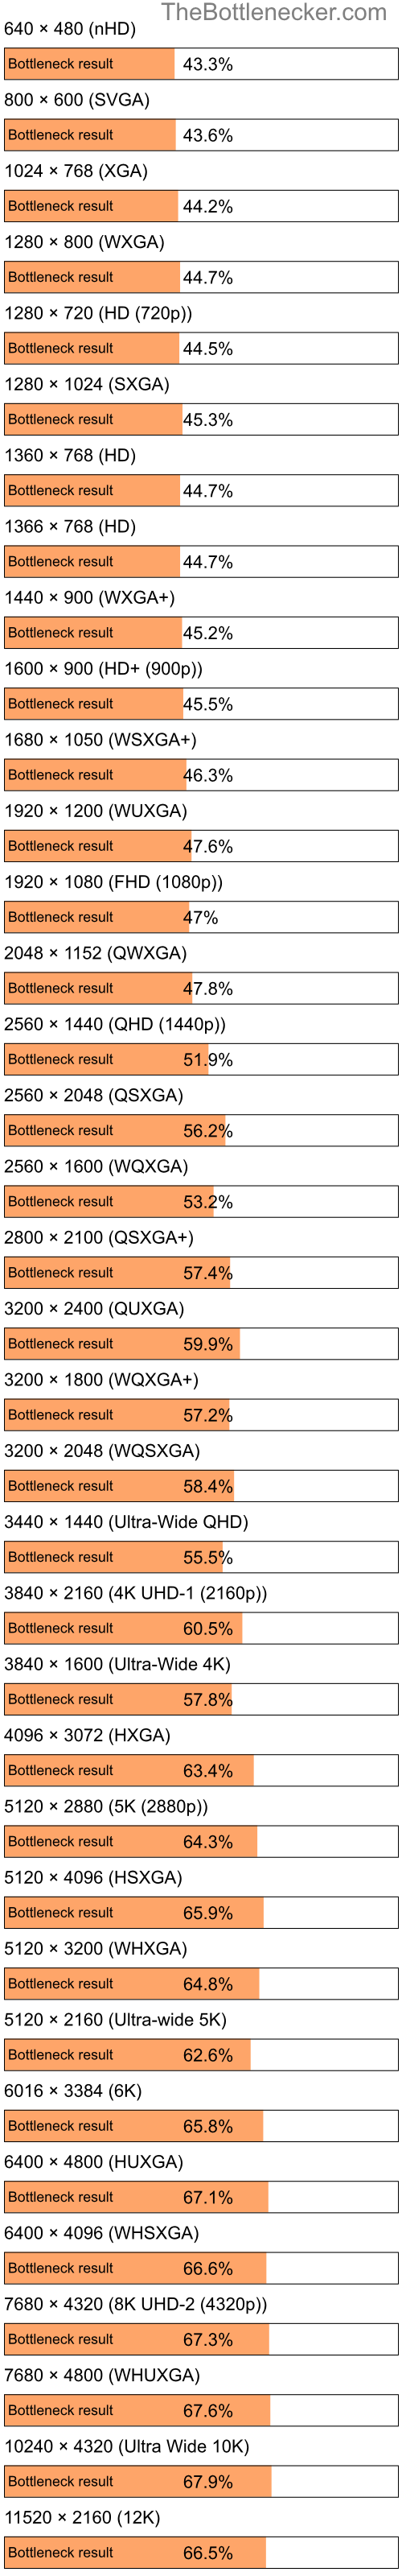 Bottleneck results by resolution for AMD Ryzen 9 5900X and NVIDIA GeForce GTX 1050 Ti in Graphic Card Intense Tasks